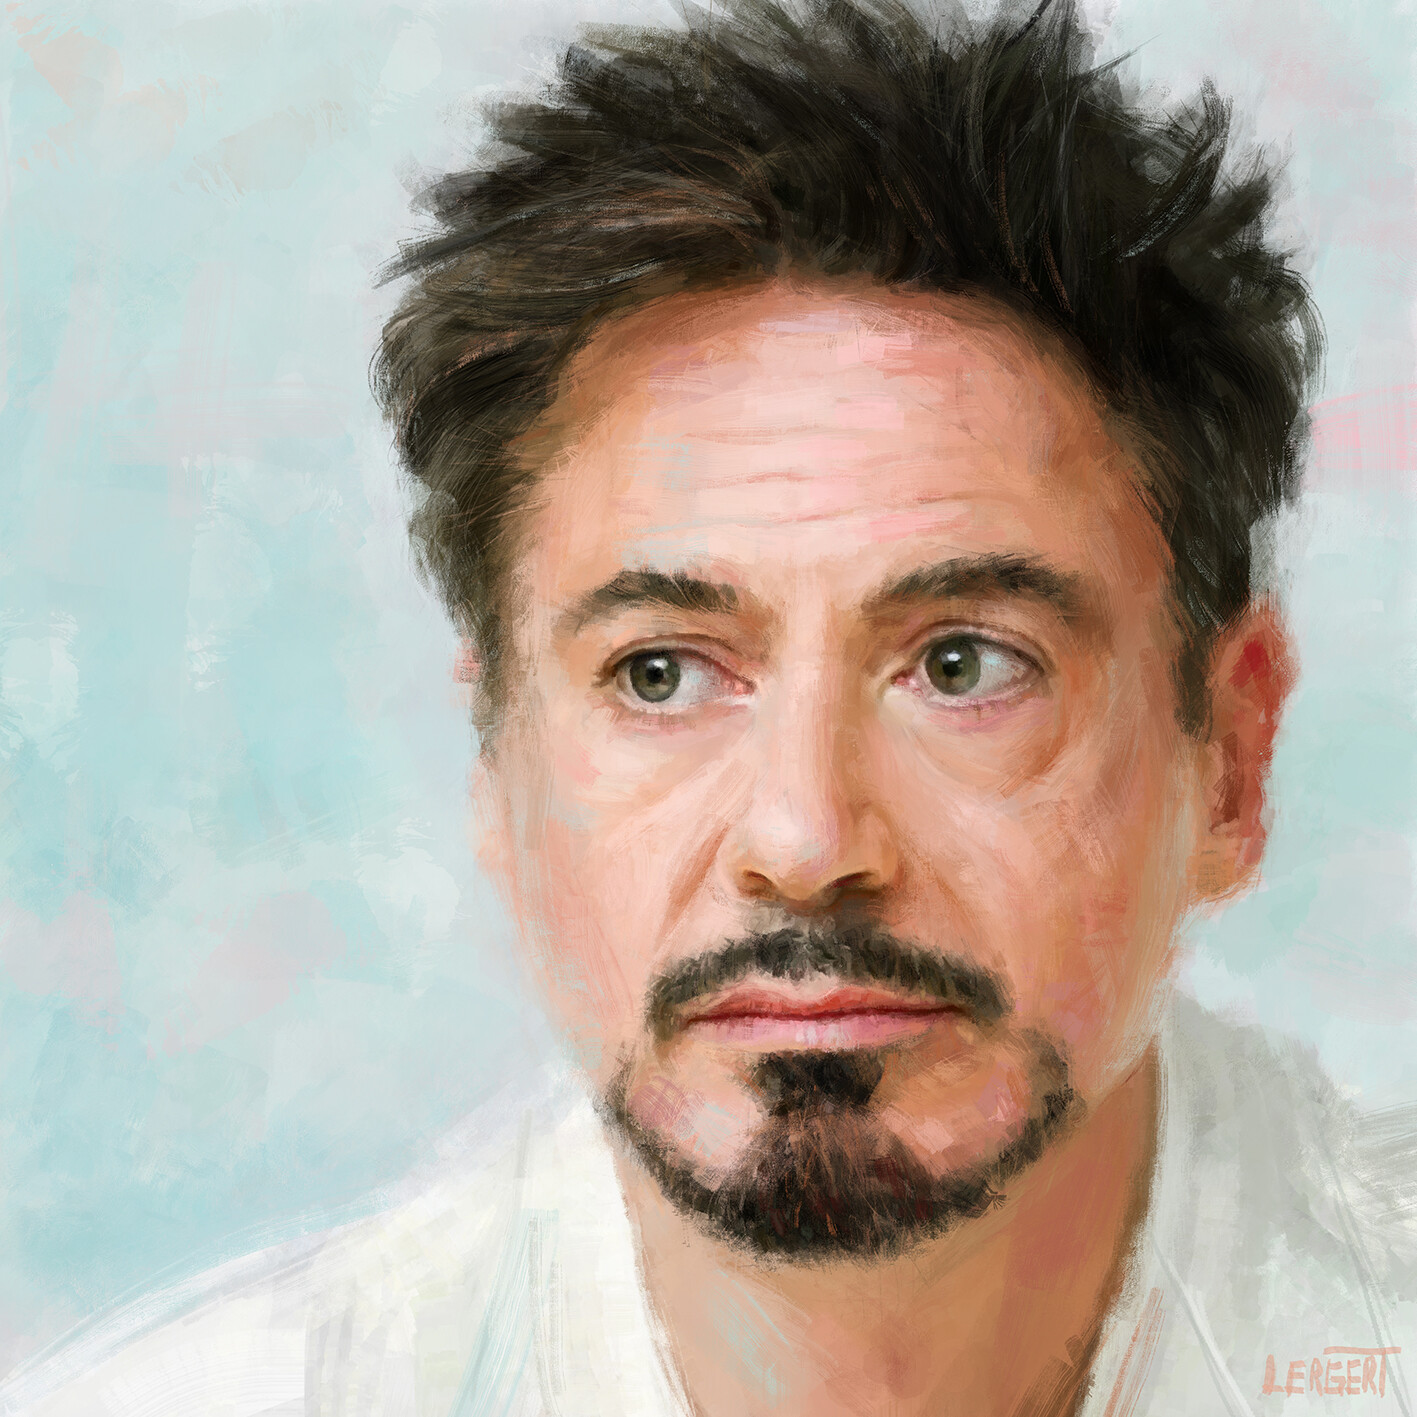 Urban Cafe Radio - On This Day In 2015; Robert Downey Jr. was named the  world's highest paid actor by Forbes Magazine, earning $80 million. |  Facebook